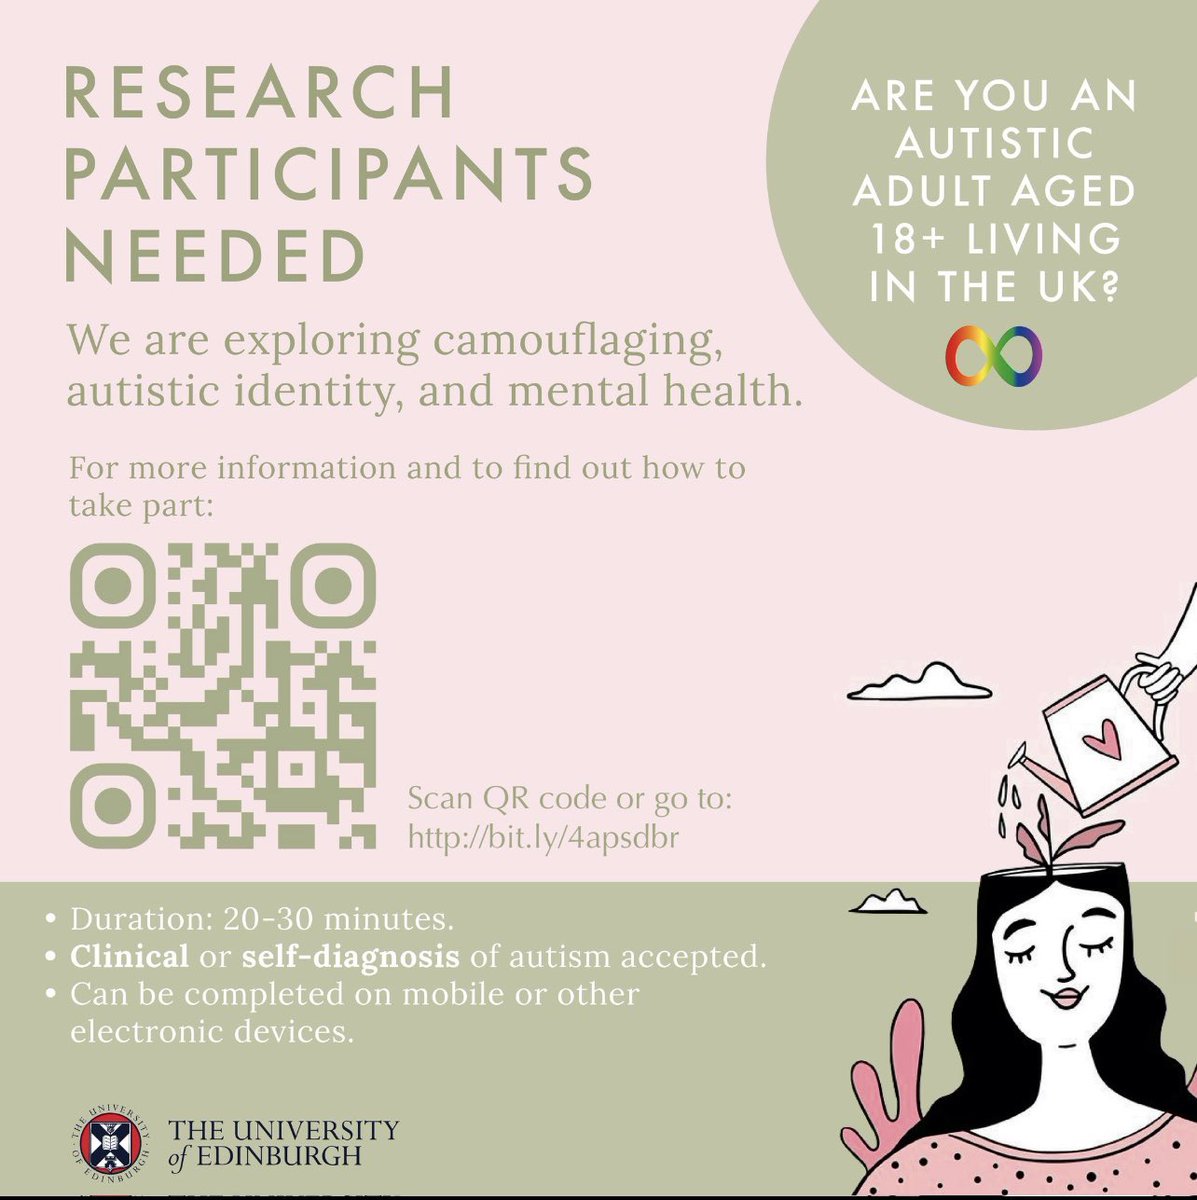 Please help take part in this research by MSc students @EdinburghUni. #camouflaging #identity #Autism here is the link - bit.ly/4apsdbr